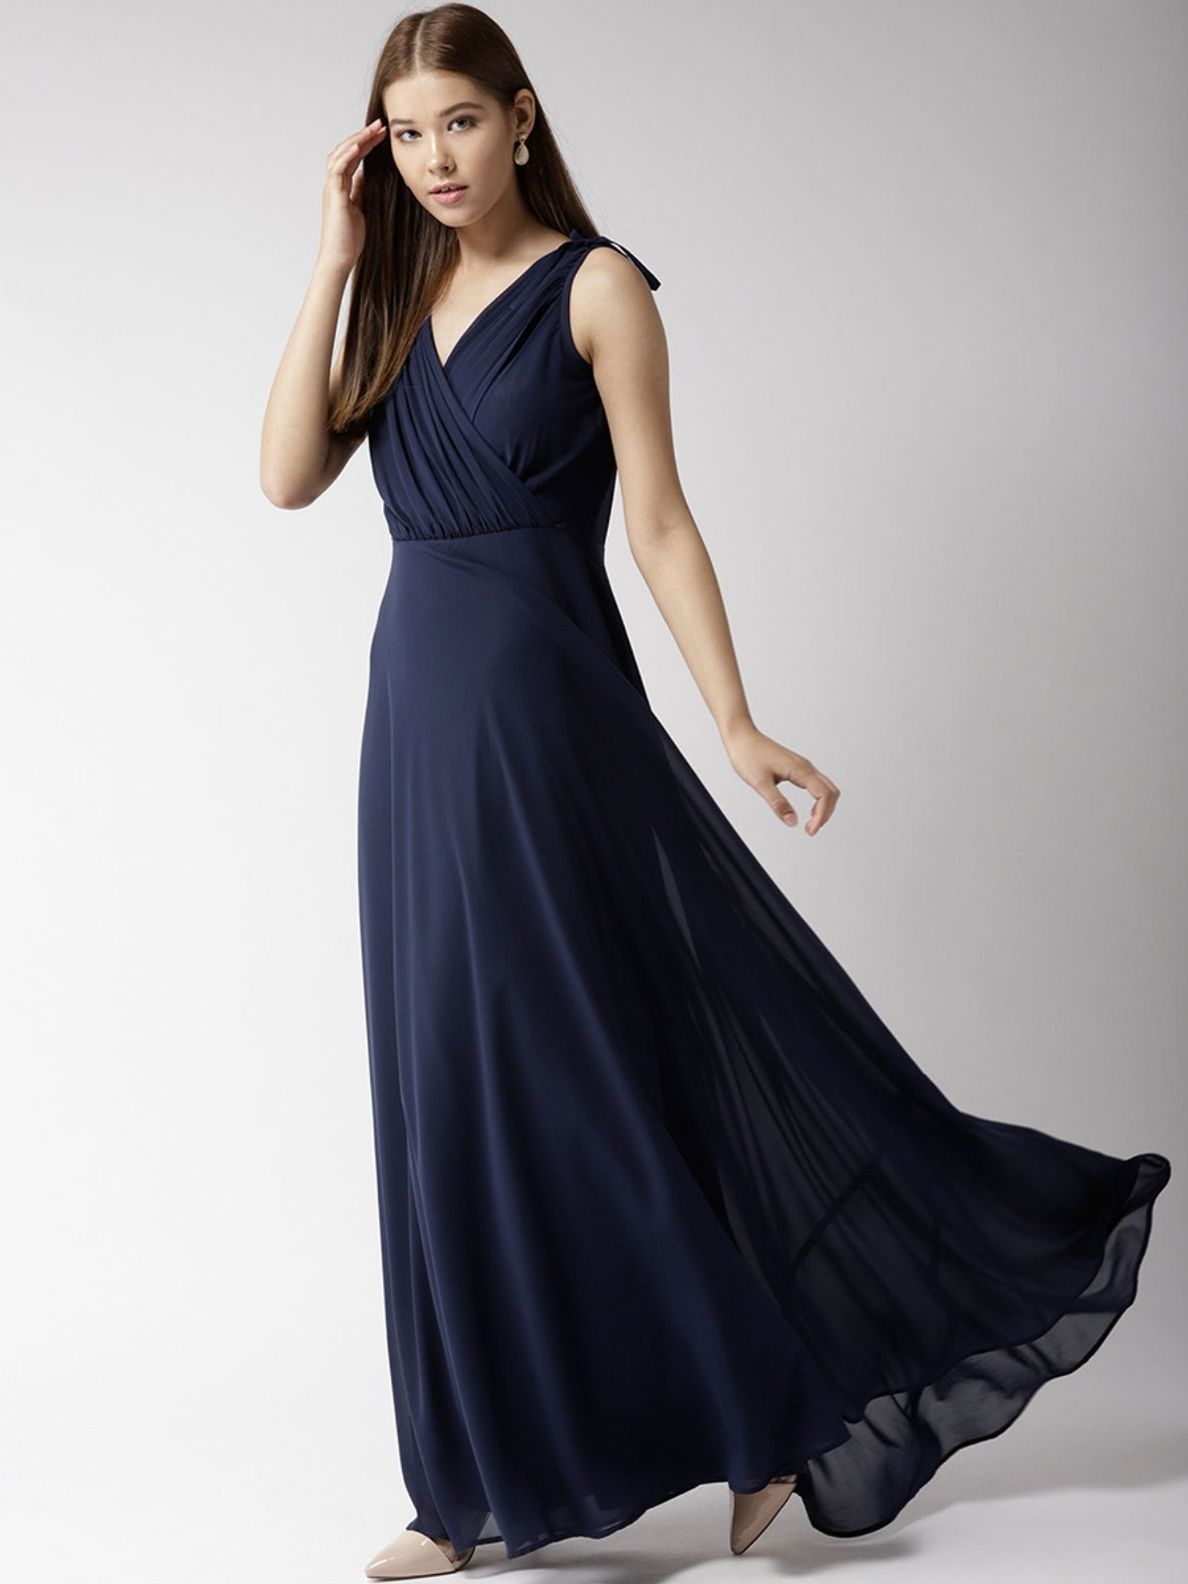 Twenty Dresses By Nykaa Fashion Ready For The Royals Pink Maxi Dress Buy  Twenty Dresses By Nykaa Fashion Ready For The Royals Pink Maxi Dress Online  at Best Price in India 